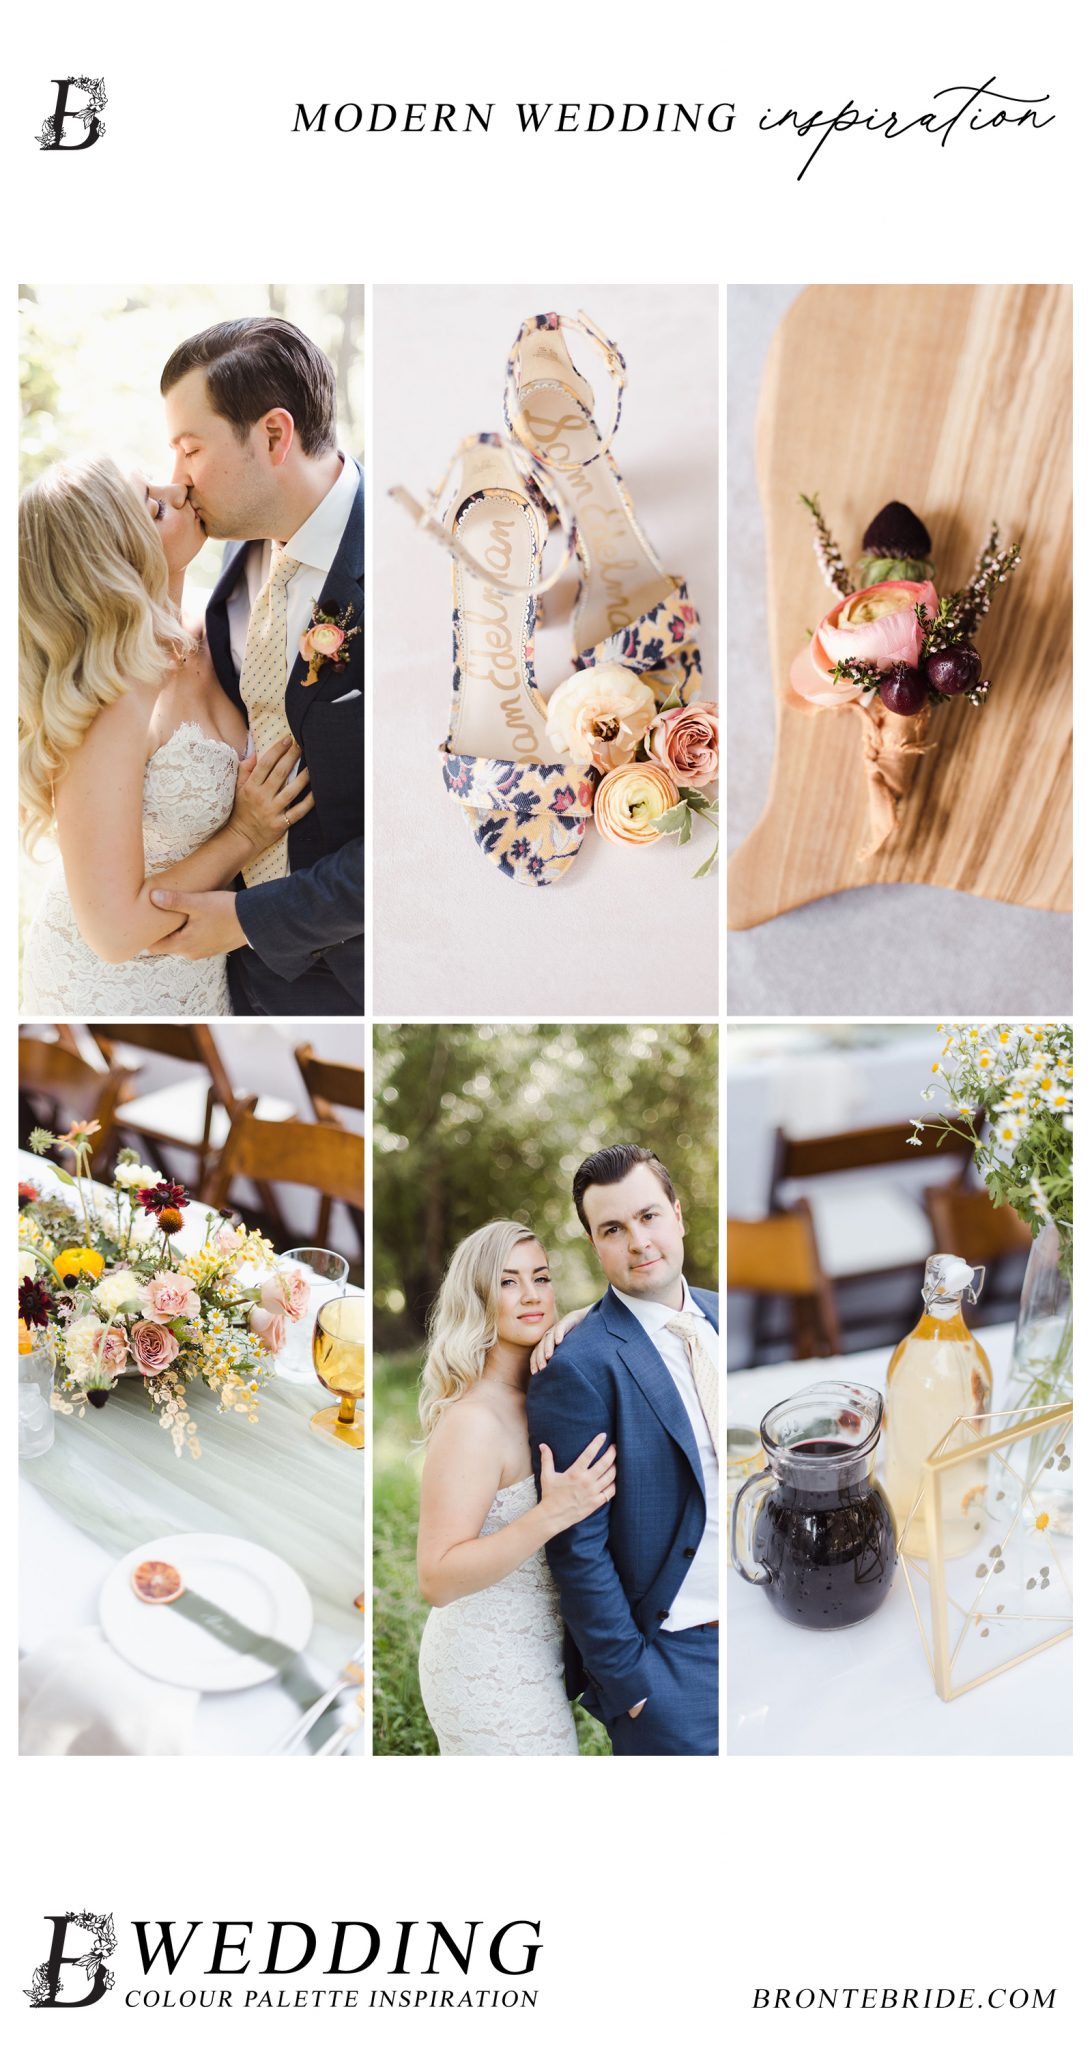 Colourful Summer Wedding Inspiration - Whimsical Florals & Italian Wine